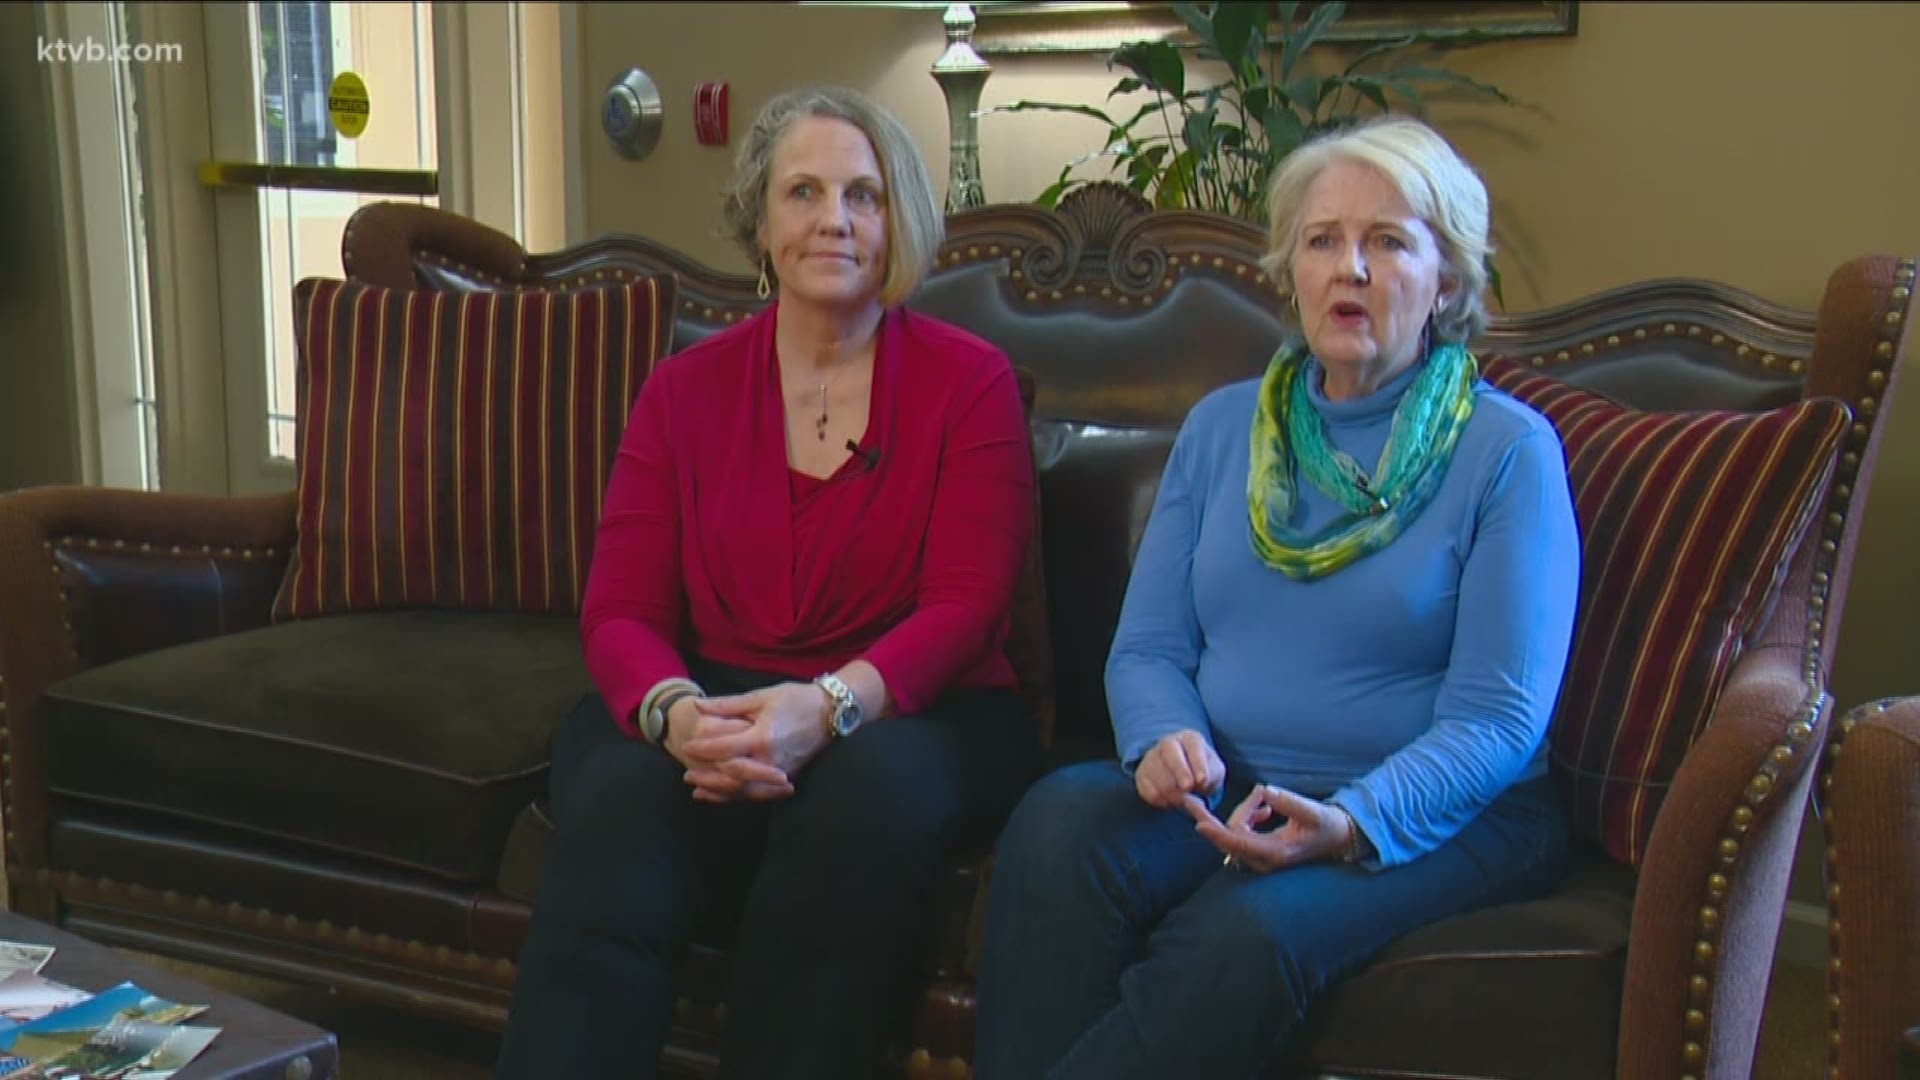 Finding caregivers for loved ones that have Alzheimer's can be struggle and the number of Idahoans living with it is only expected to grow in the near future.